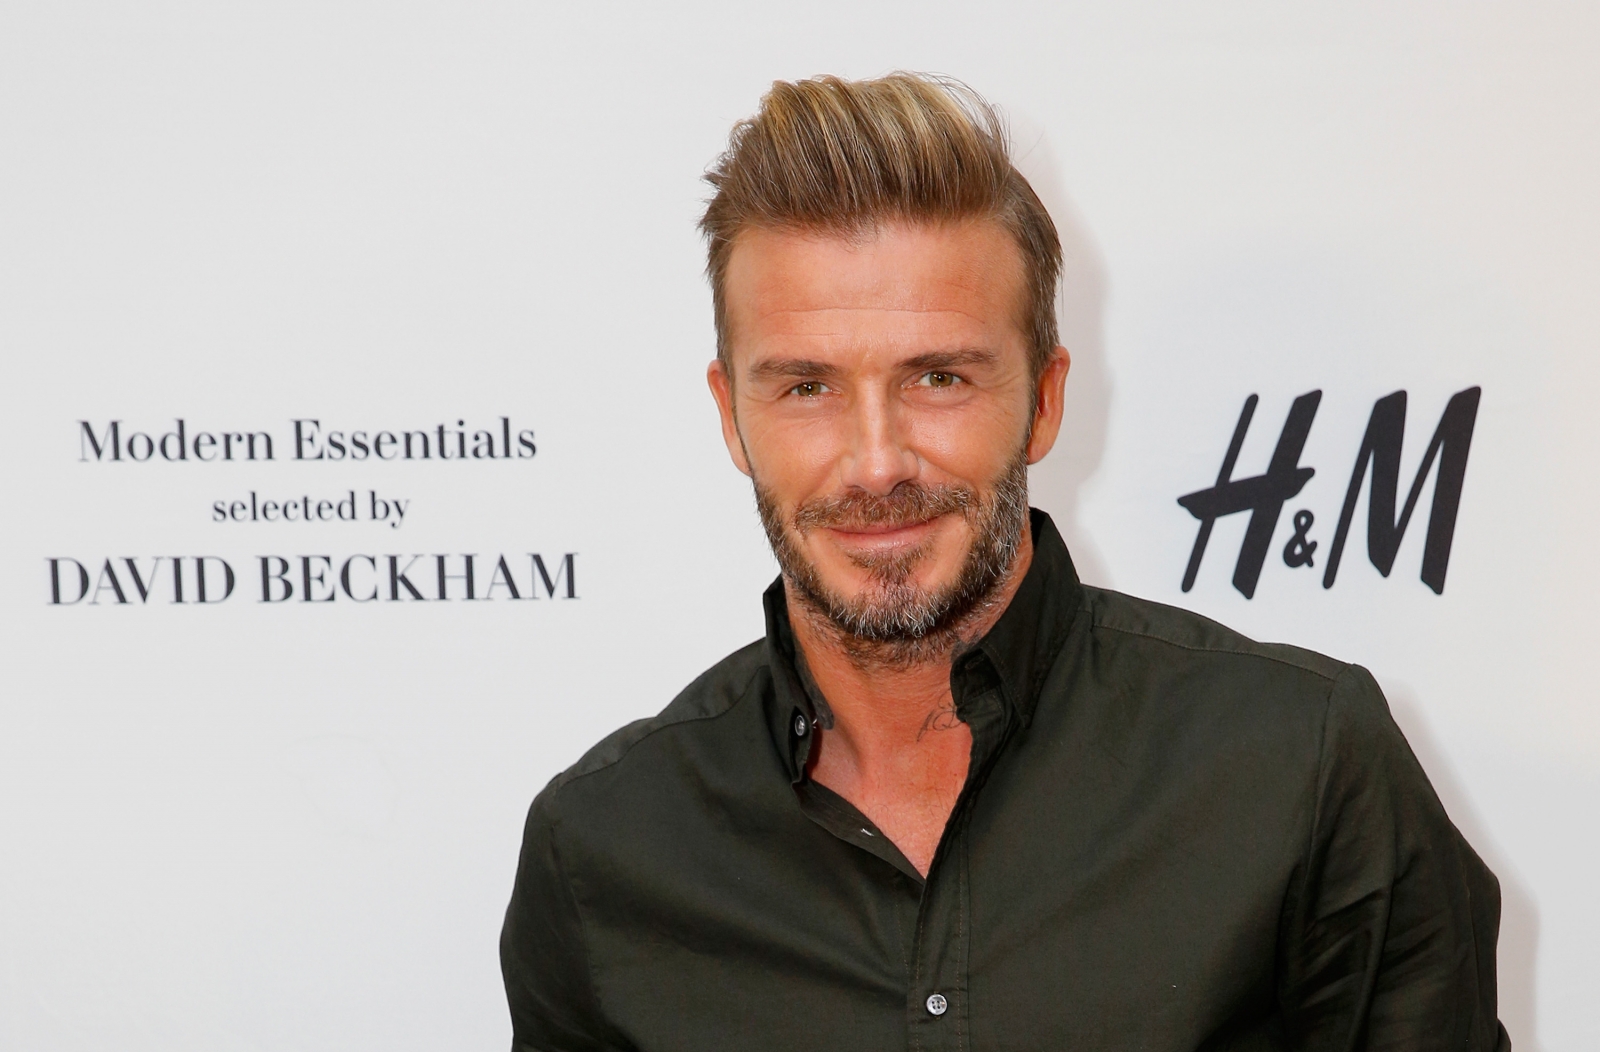 HM David Beckham Replaced By The Weeknd As Store Aims For